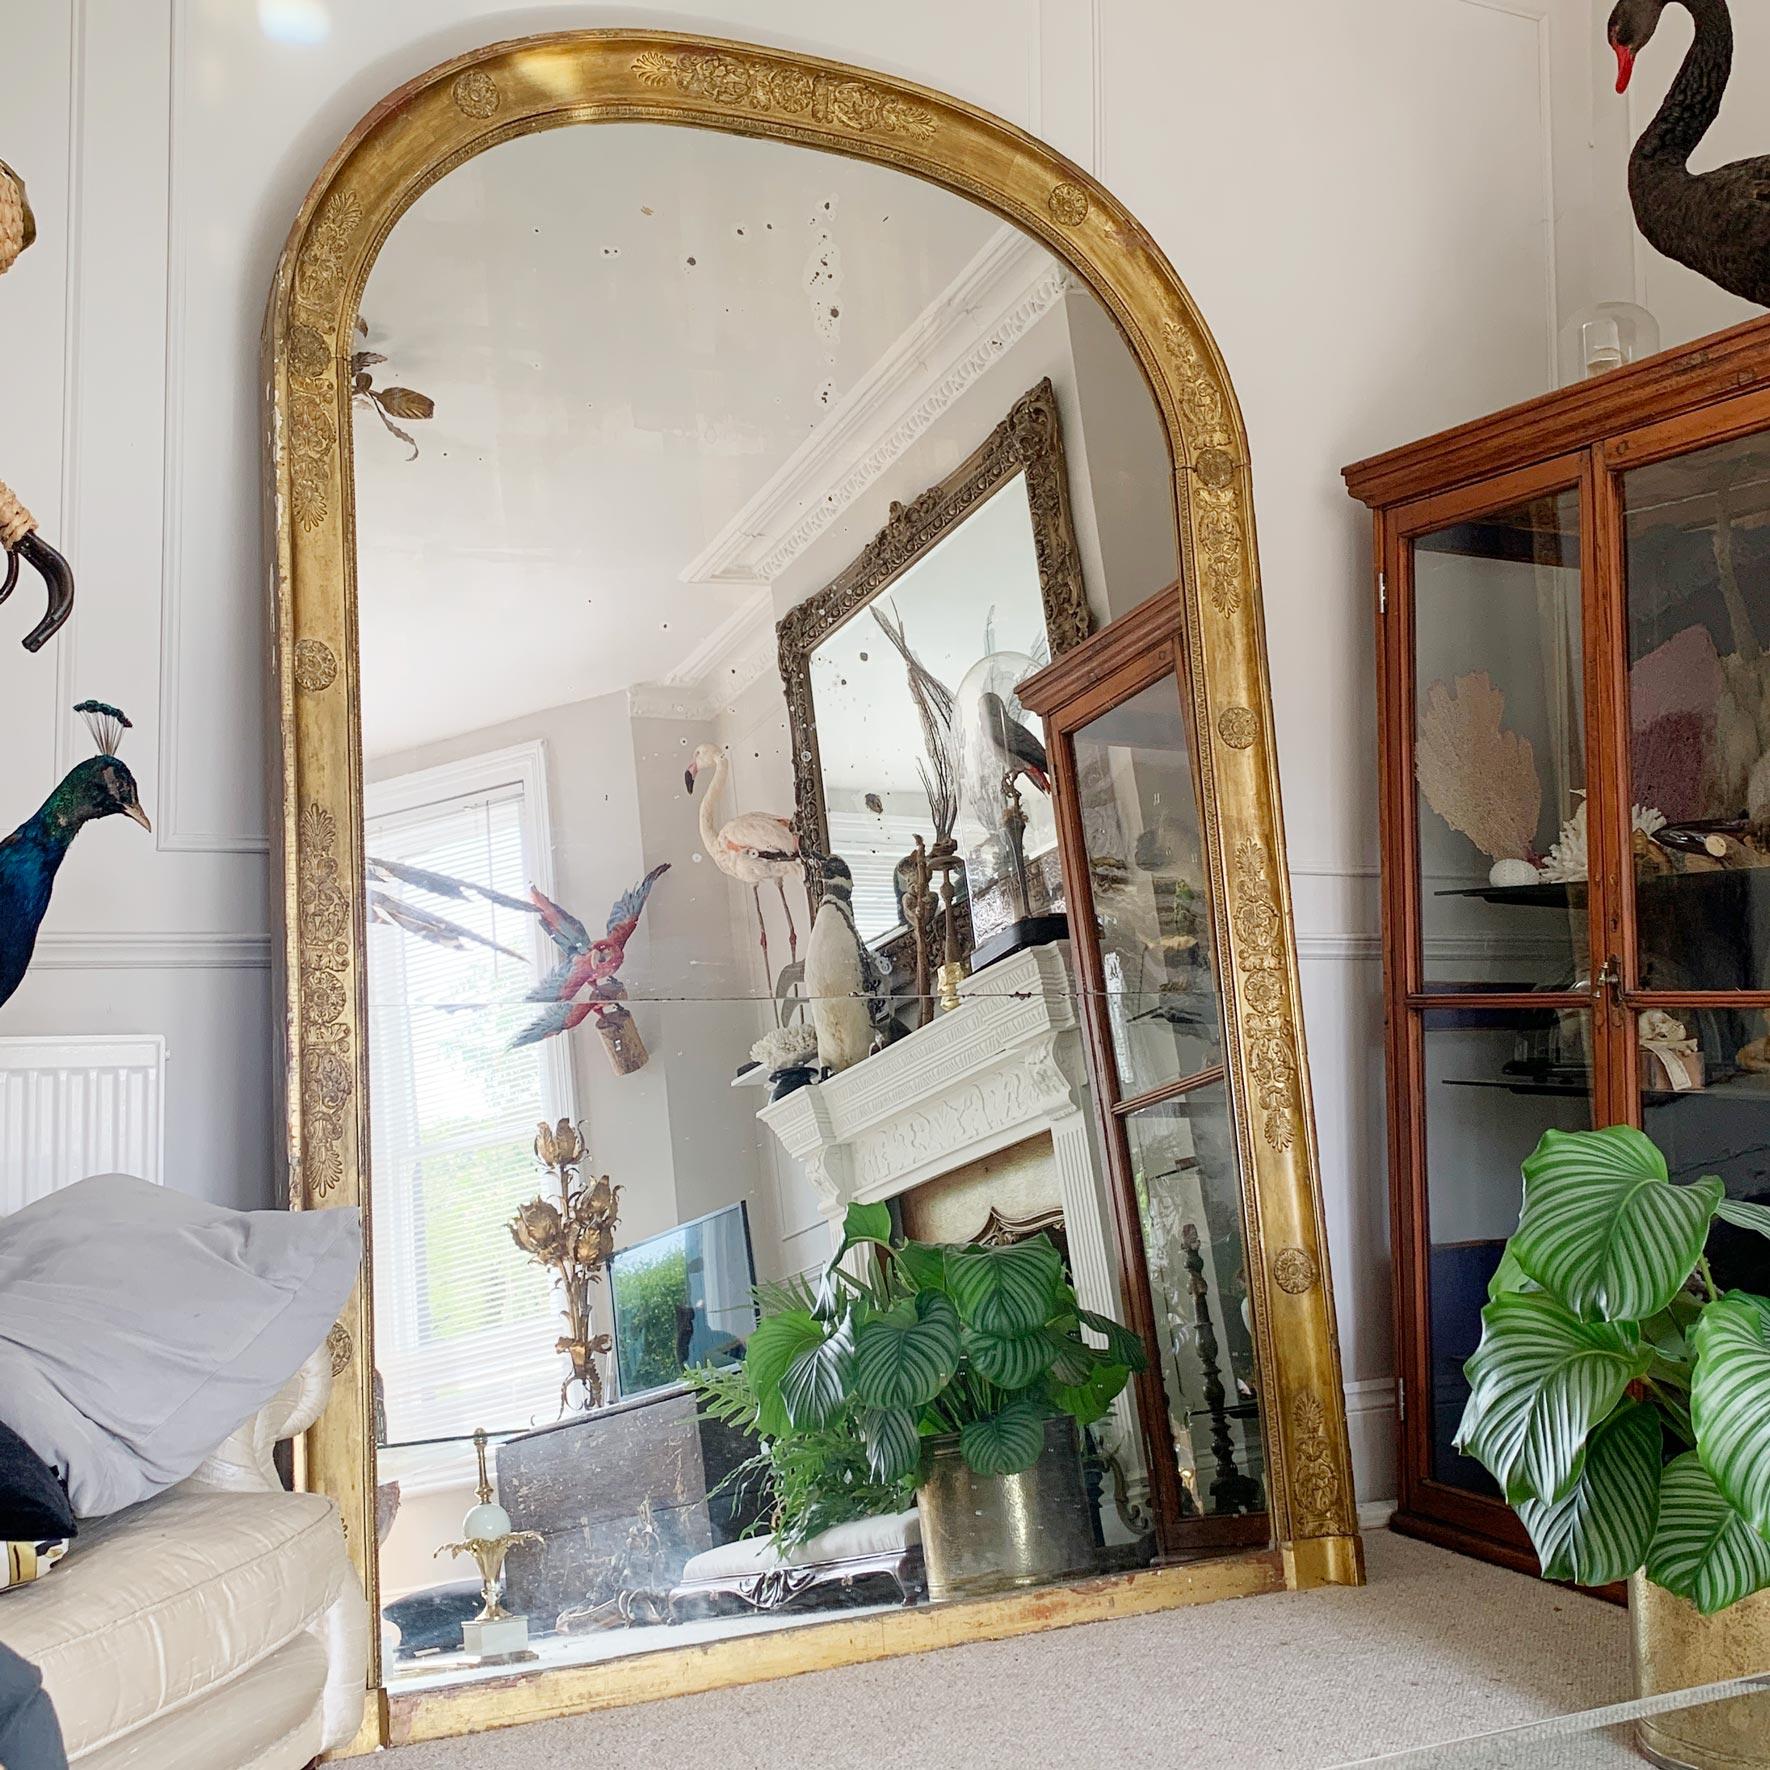 A magnificent over-mantle 19th century French mirror in the Louis Philippe style, the incredible split plate with superb foxing sits within the splendid wooden frame with gilt gesso decoration.

The size and proportions of this mirror cannot be